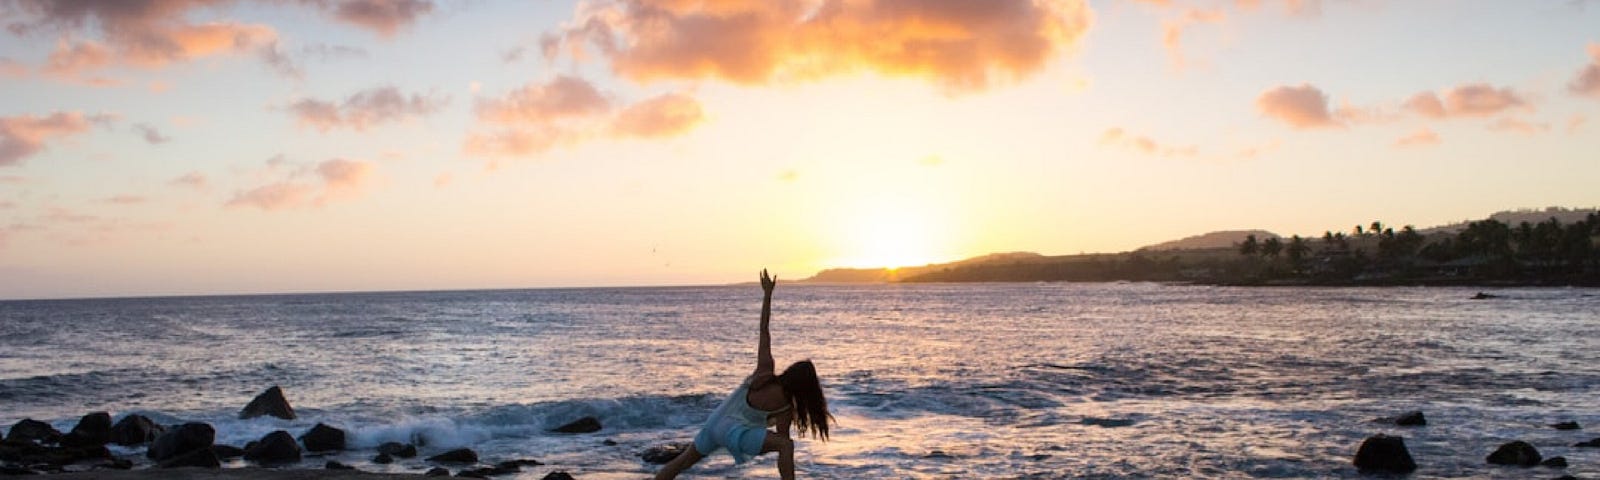 Woman doing yoga on the beach beside the ocean with the sun setting behind her. Chanting OM benefits the body, mind and soul